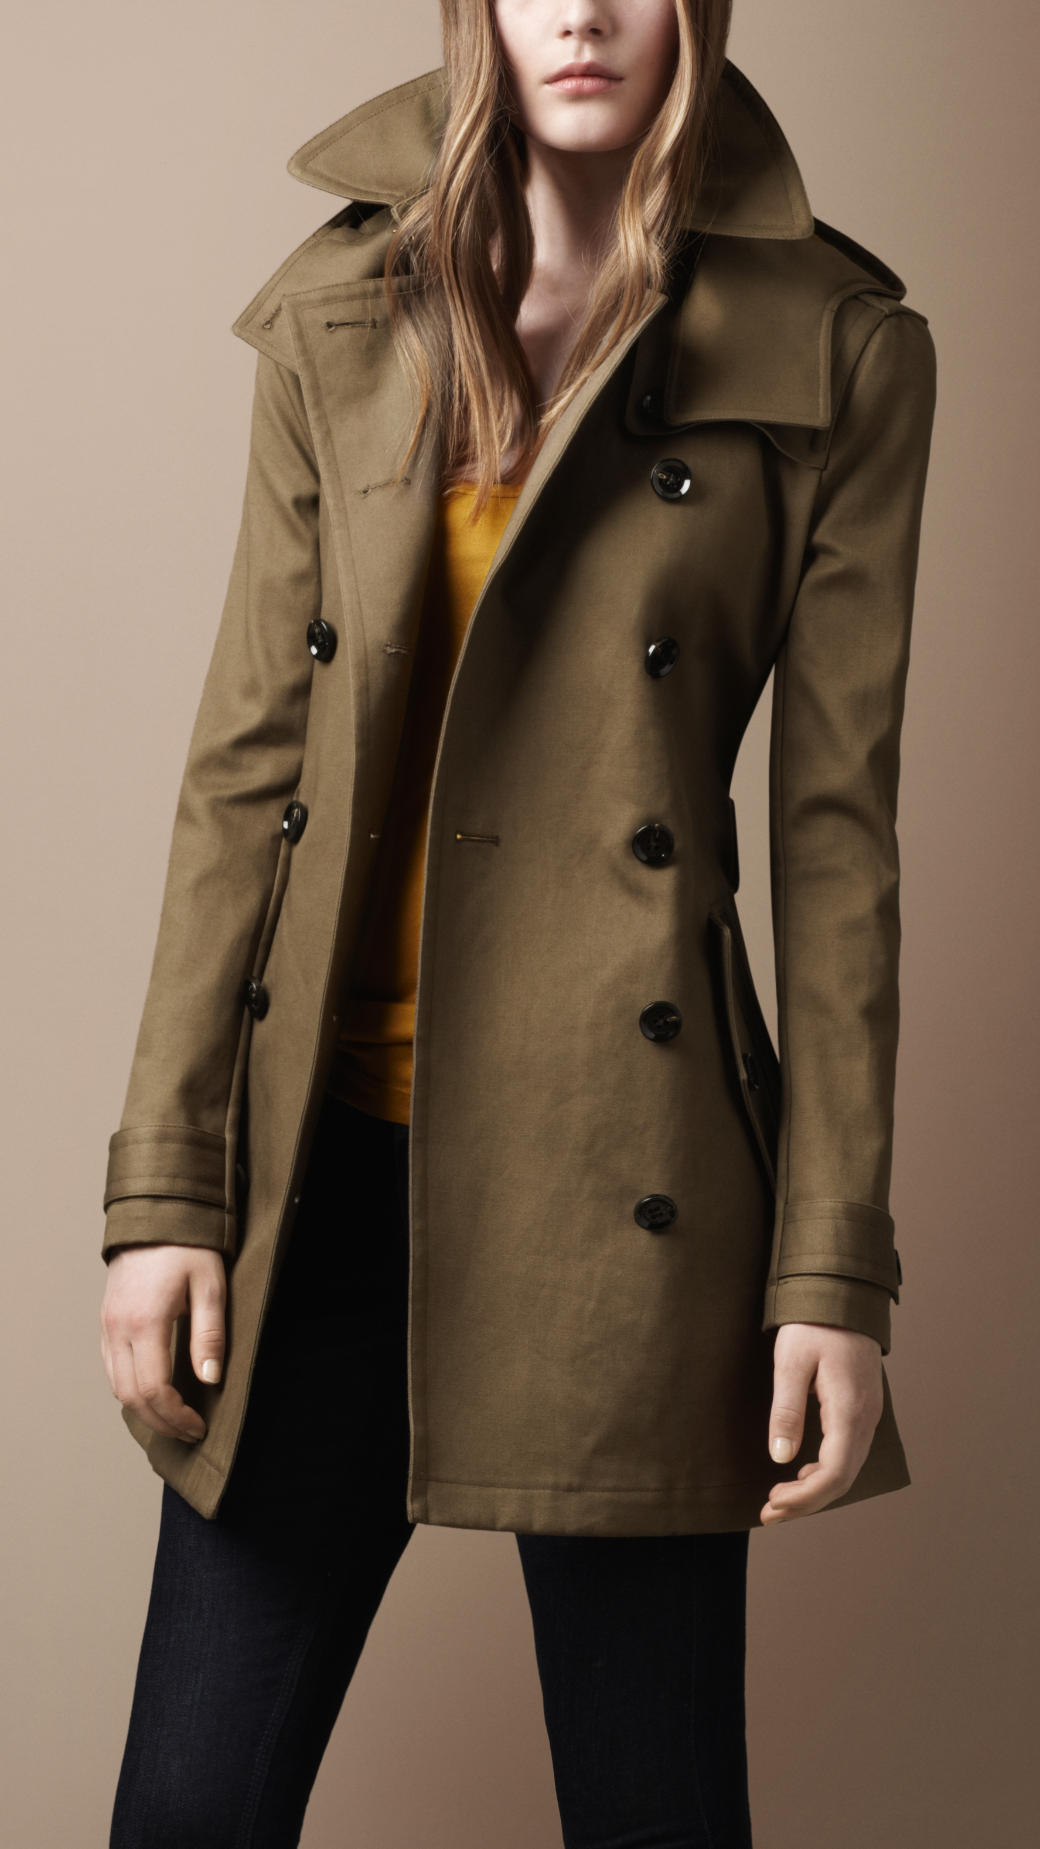 Burberry Brit Midlength Wool Blend Hooded Trench Coat in Khaki Green